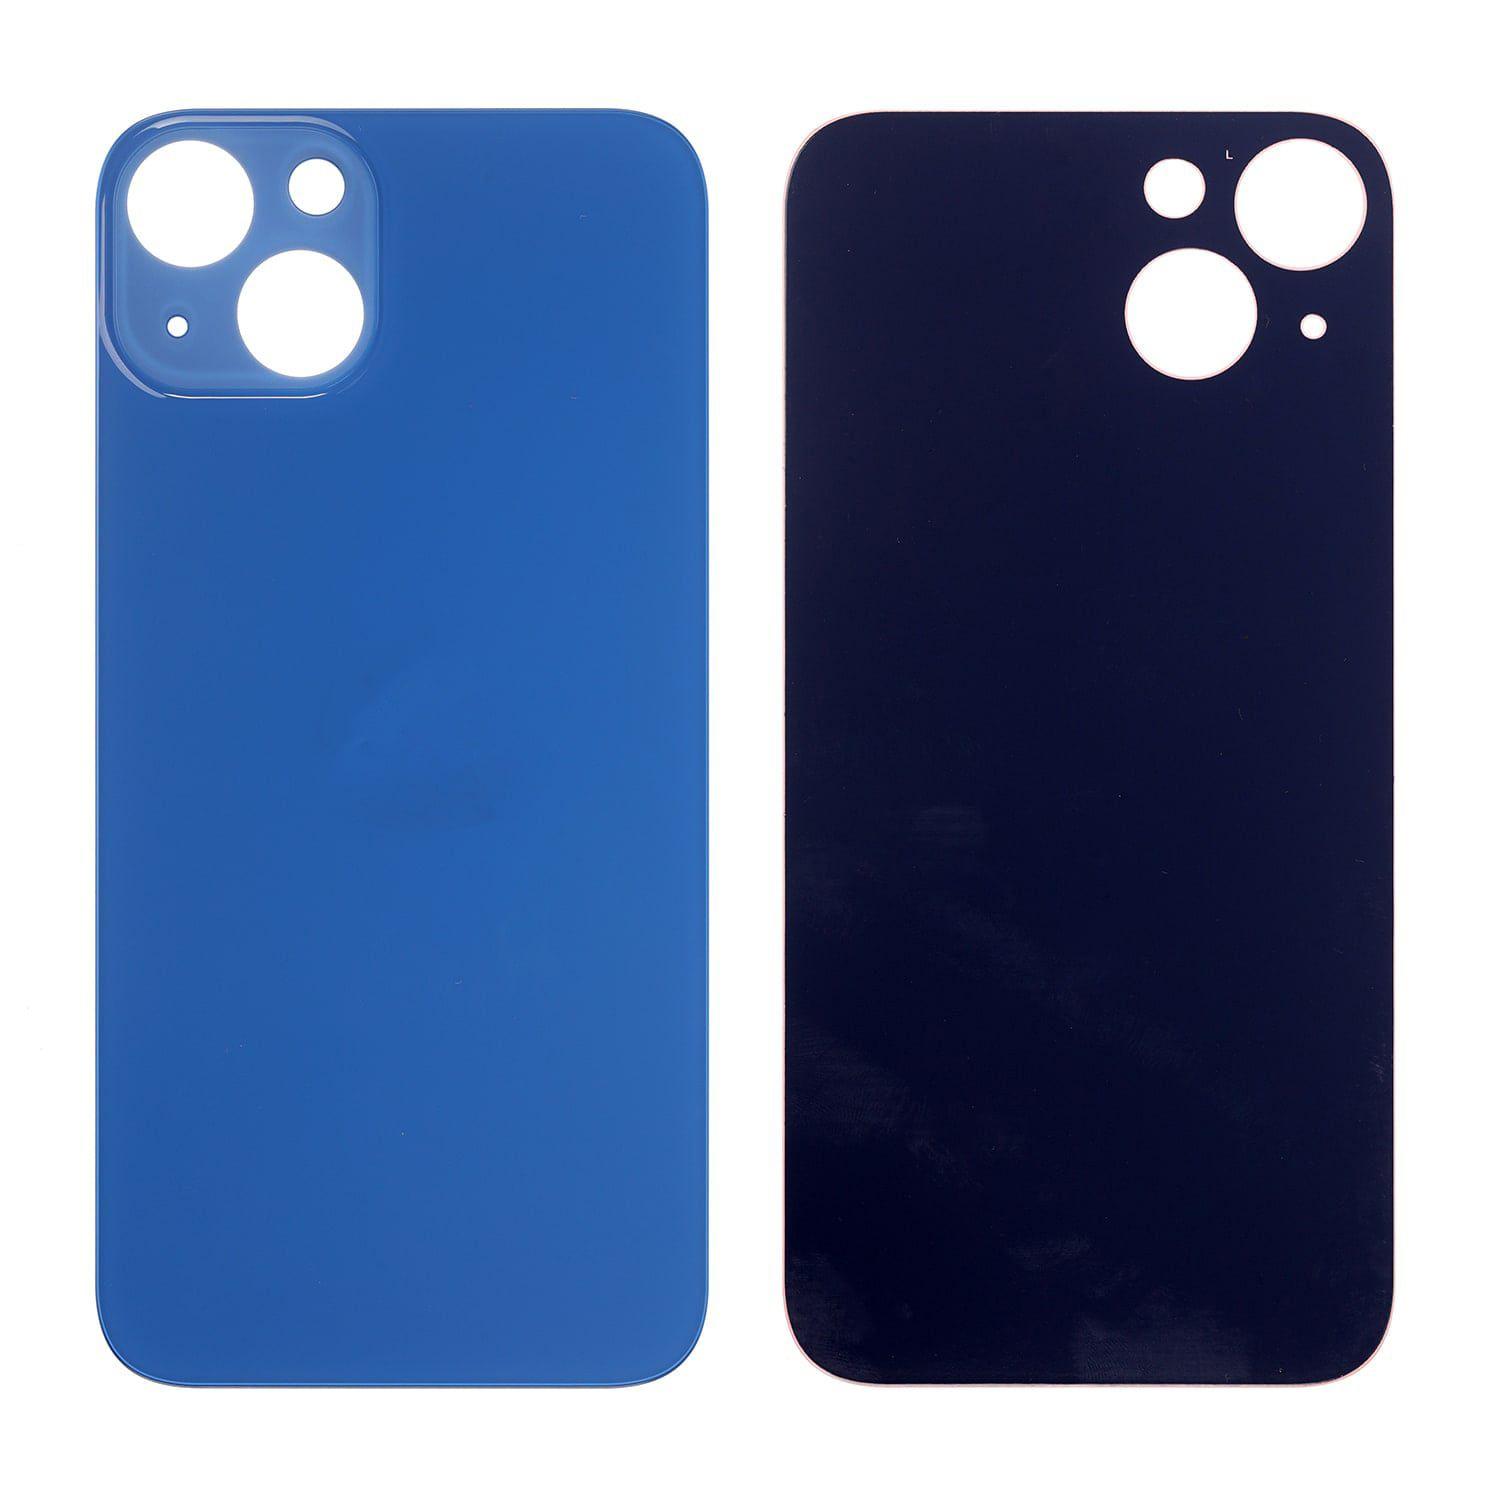 Battery cover iPhone 13 mini with bigger hole for camera glass - blue